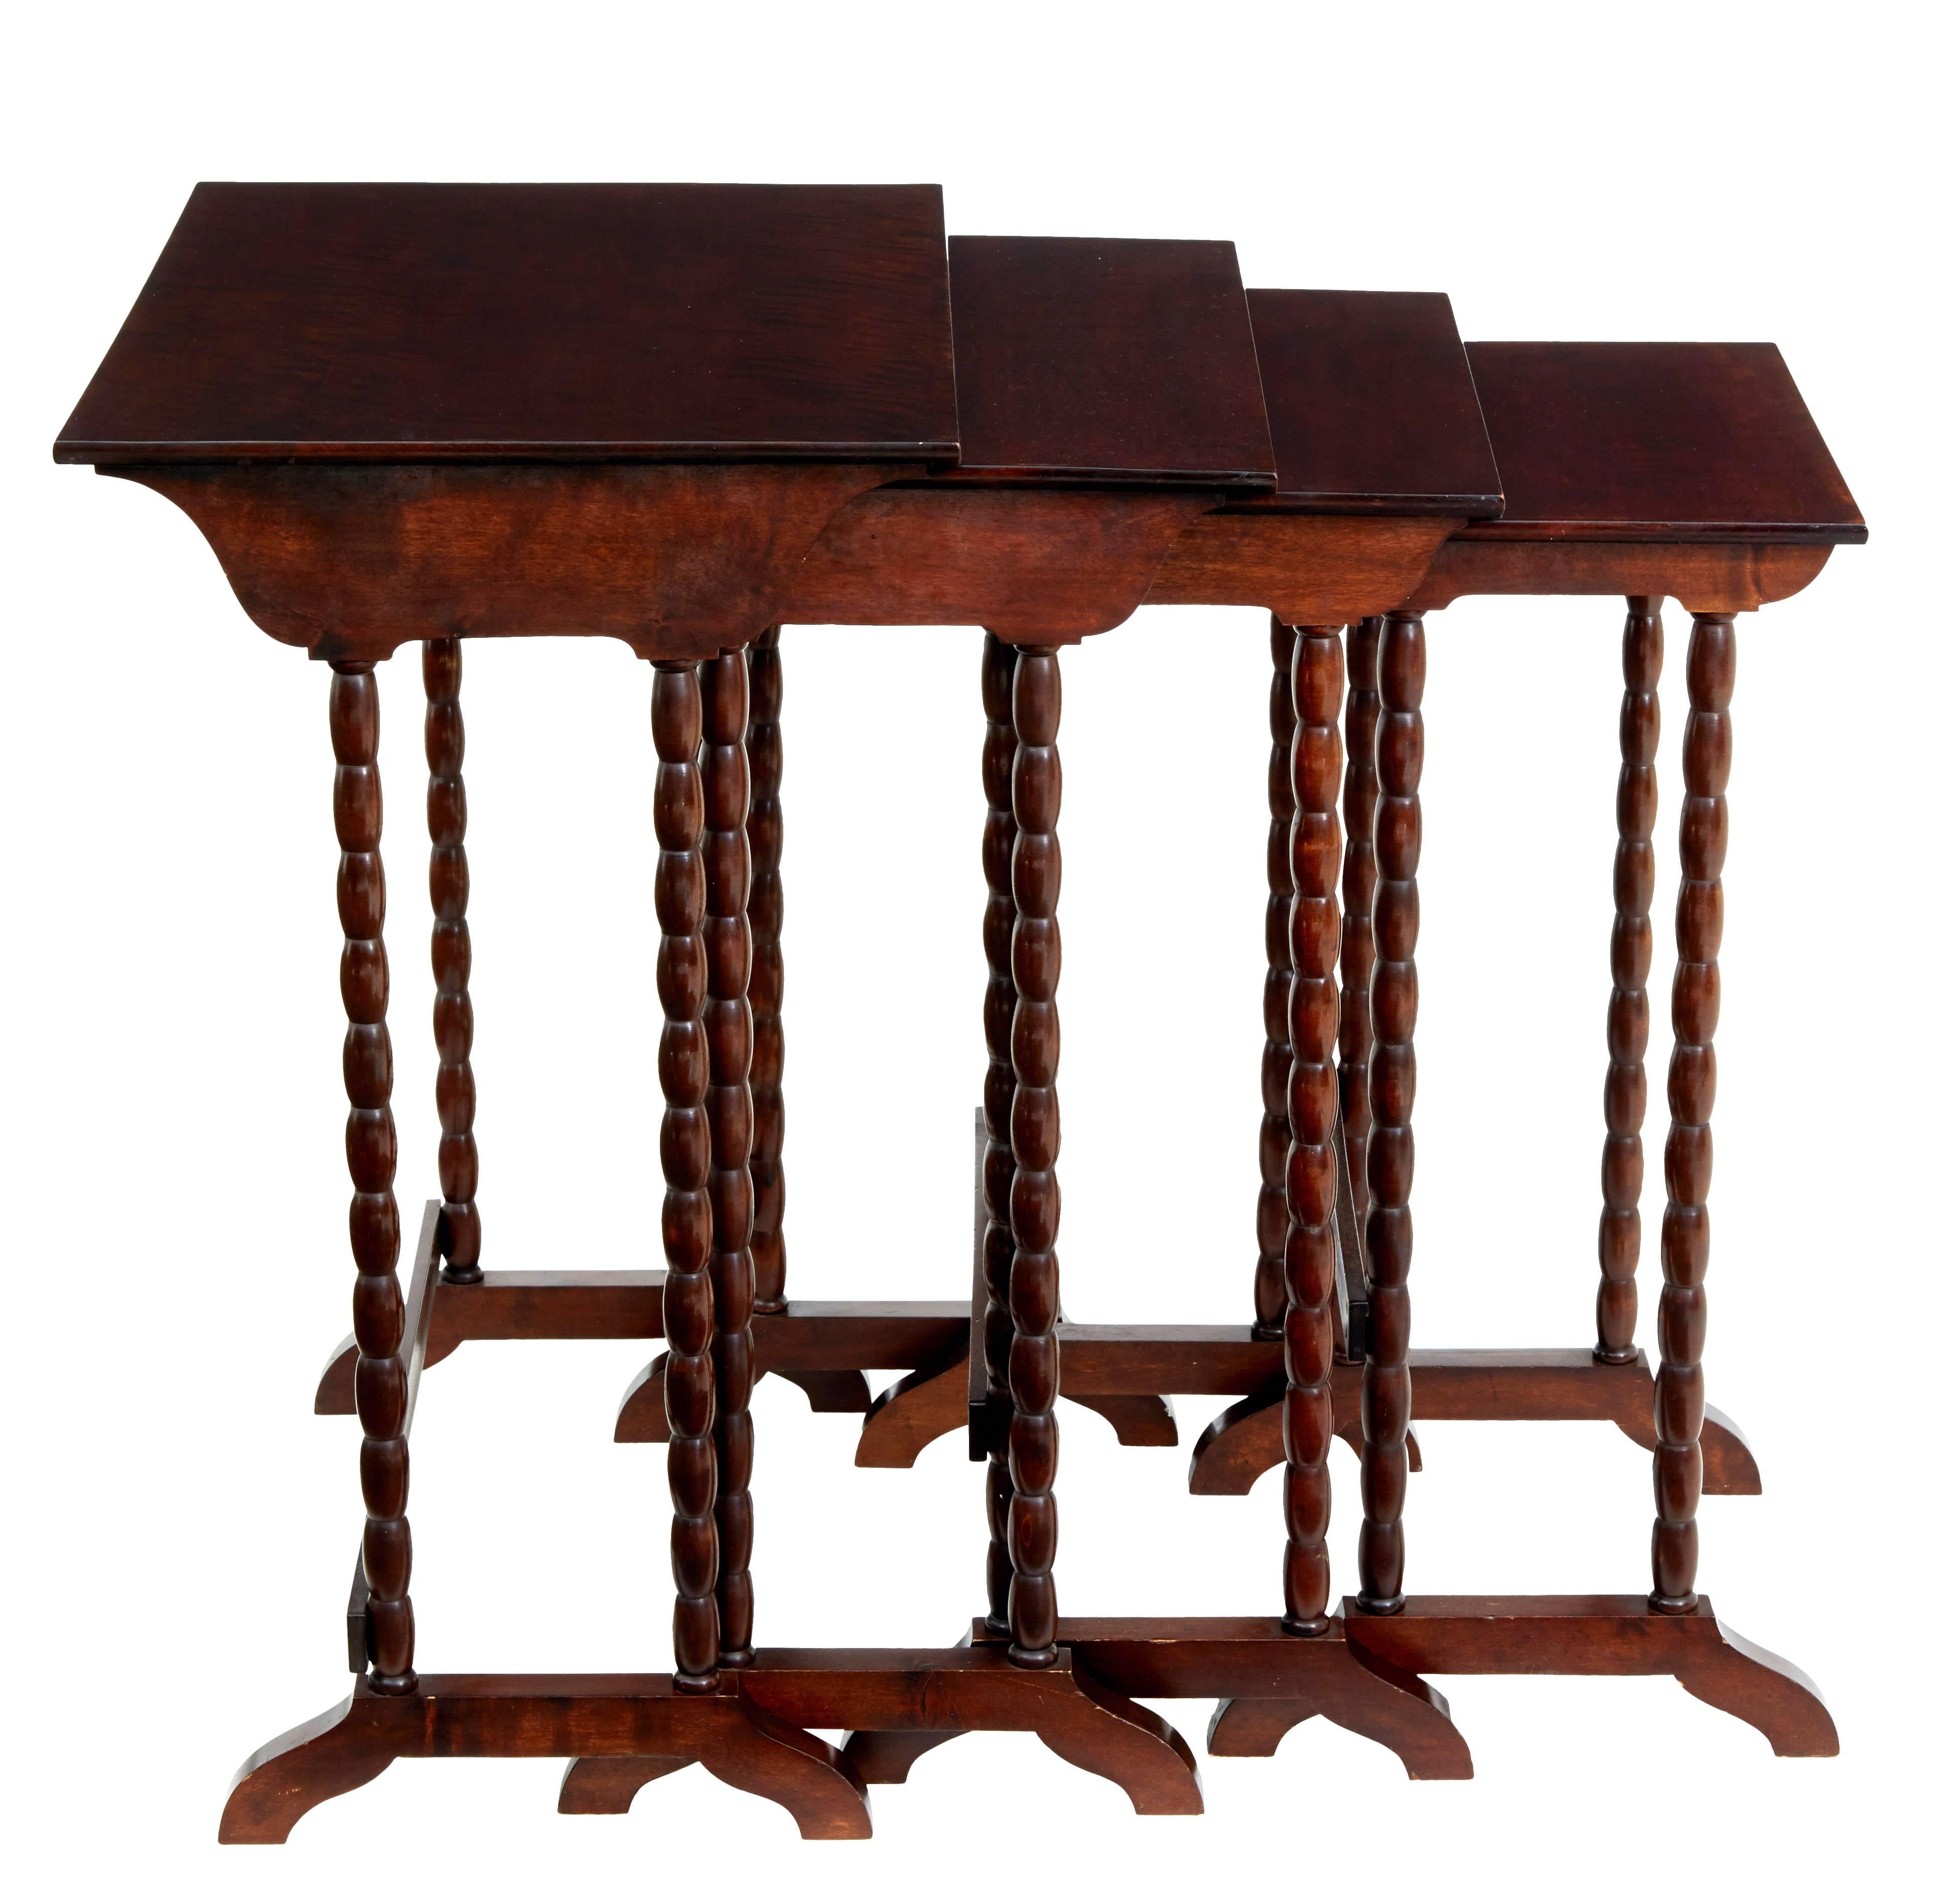 Scandinavian birch nest of four occasional tables, circa 1950.

Good quality birch which has been stained to the color of mahogany.

Bobbin turned legs.